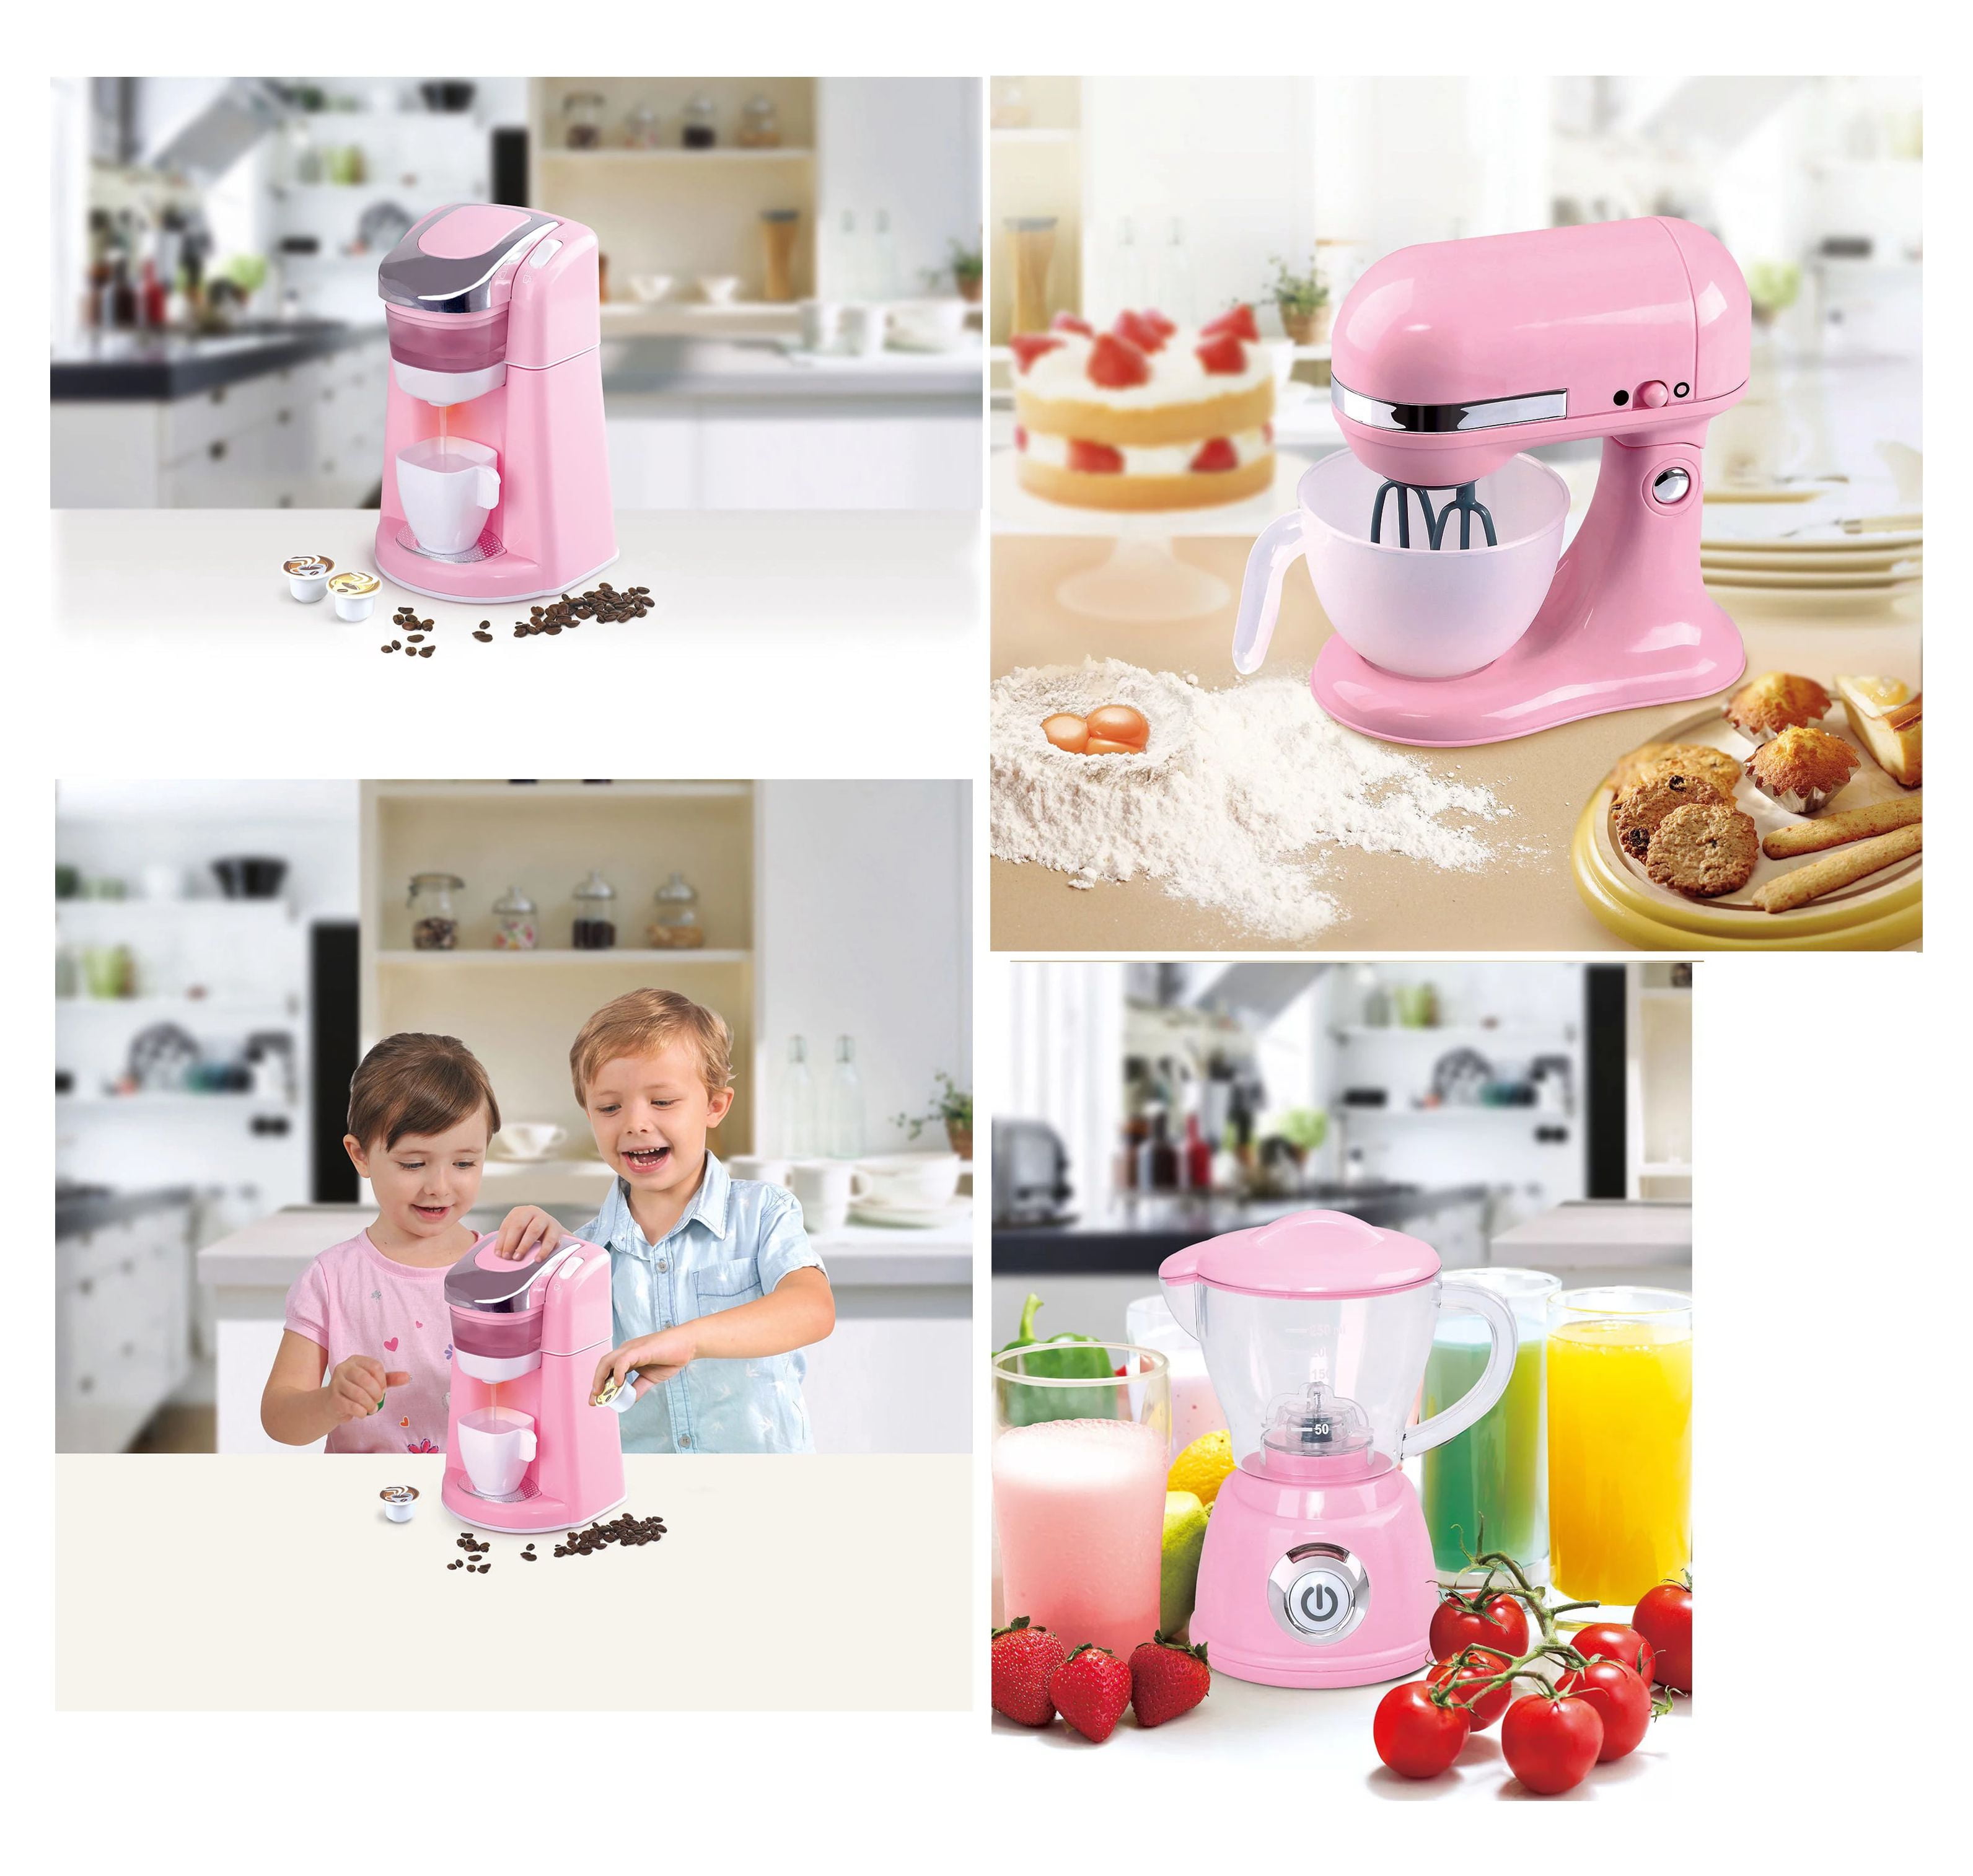 Battery Operated Gourmet Kitchen APPLIANCES (Child Size) has Pink & White  Coffee Maker w Coffee PODS, Mix Master and Blender